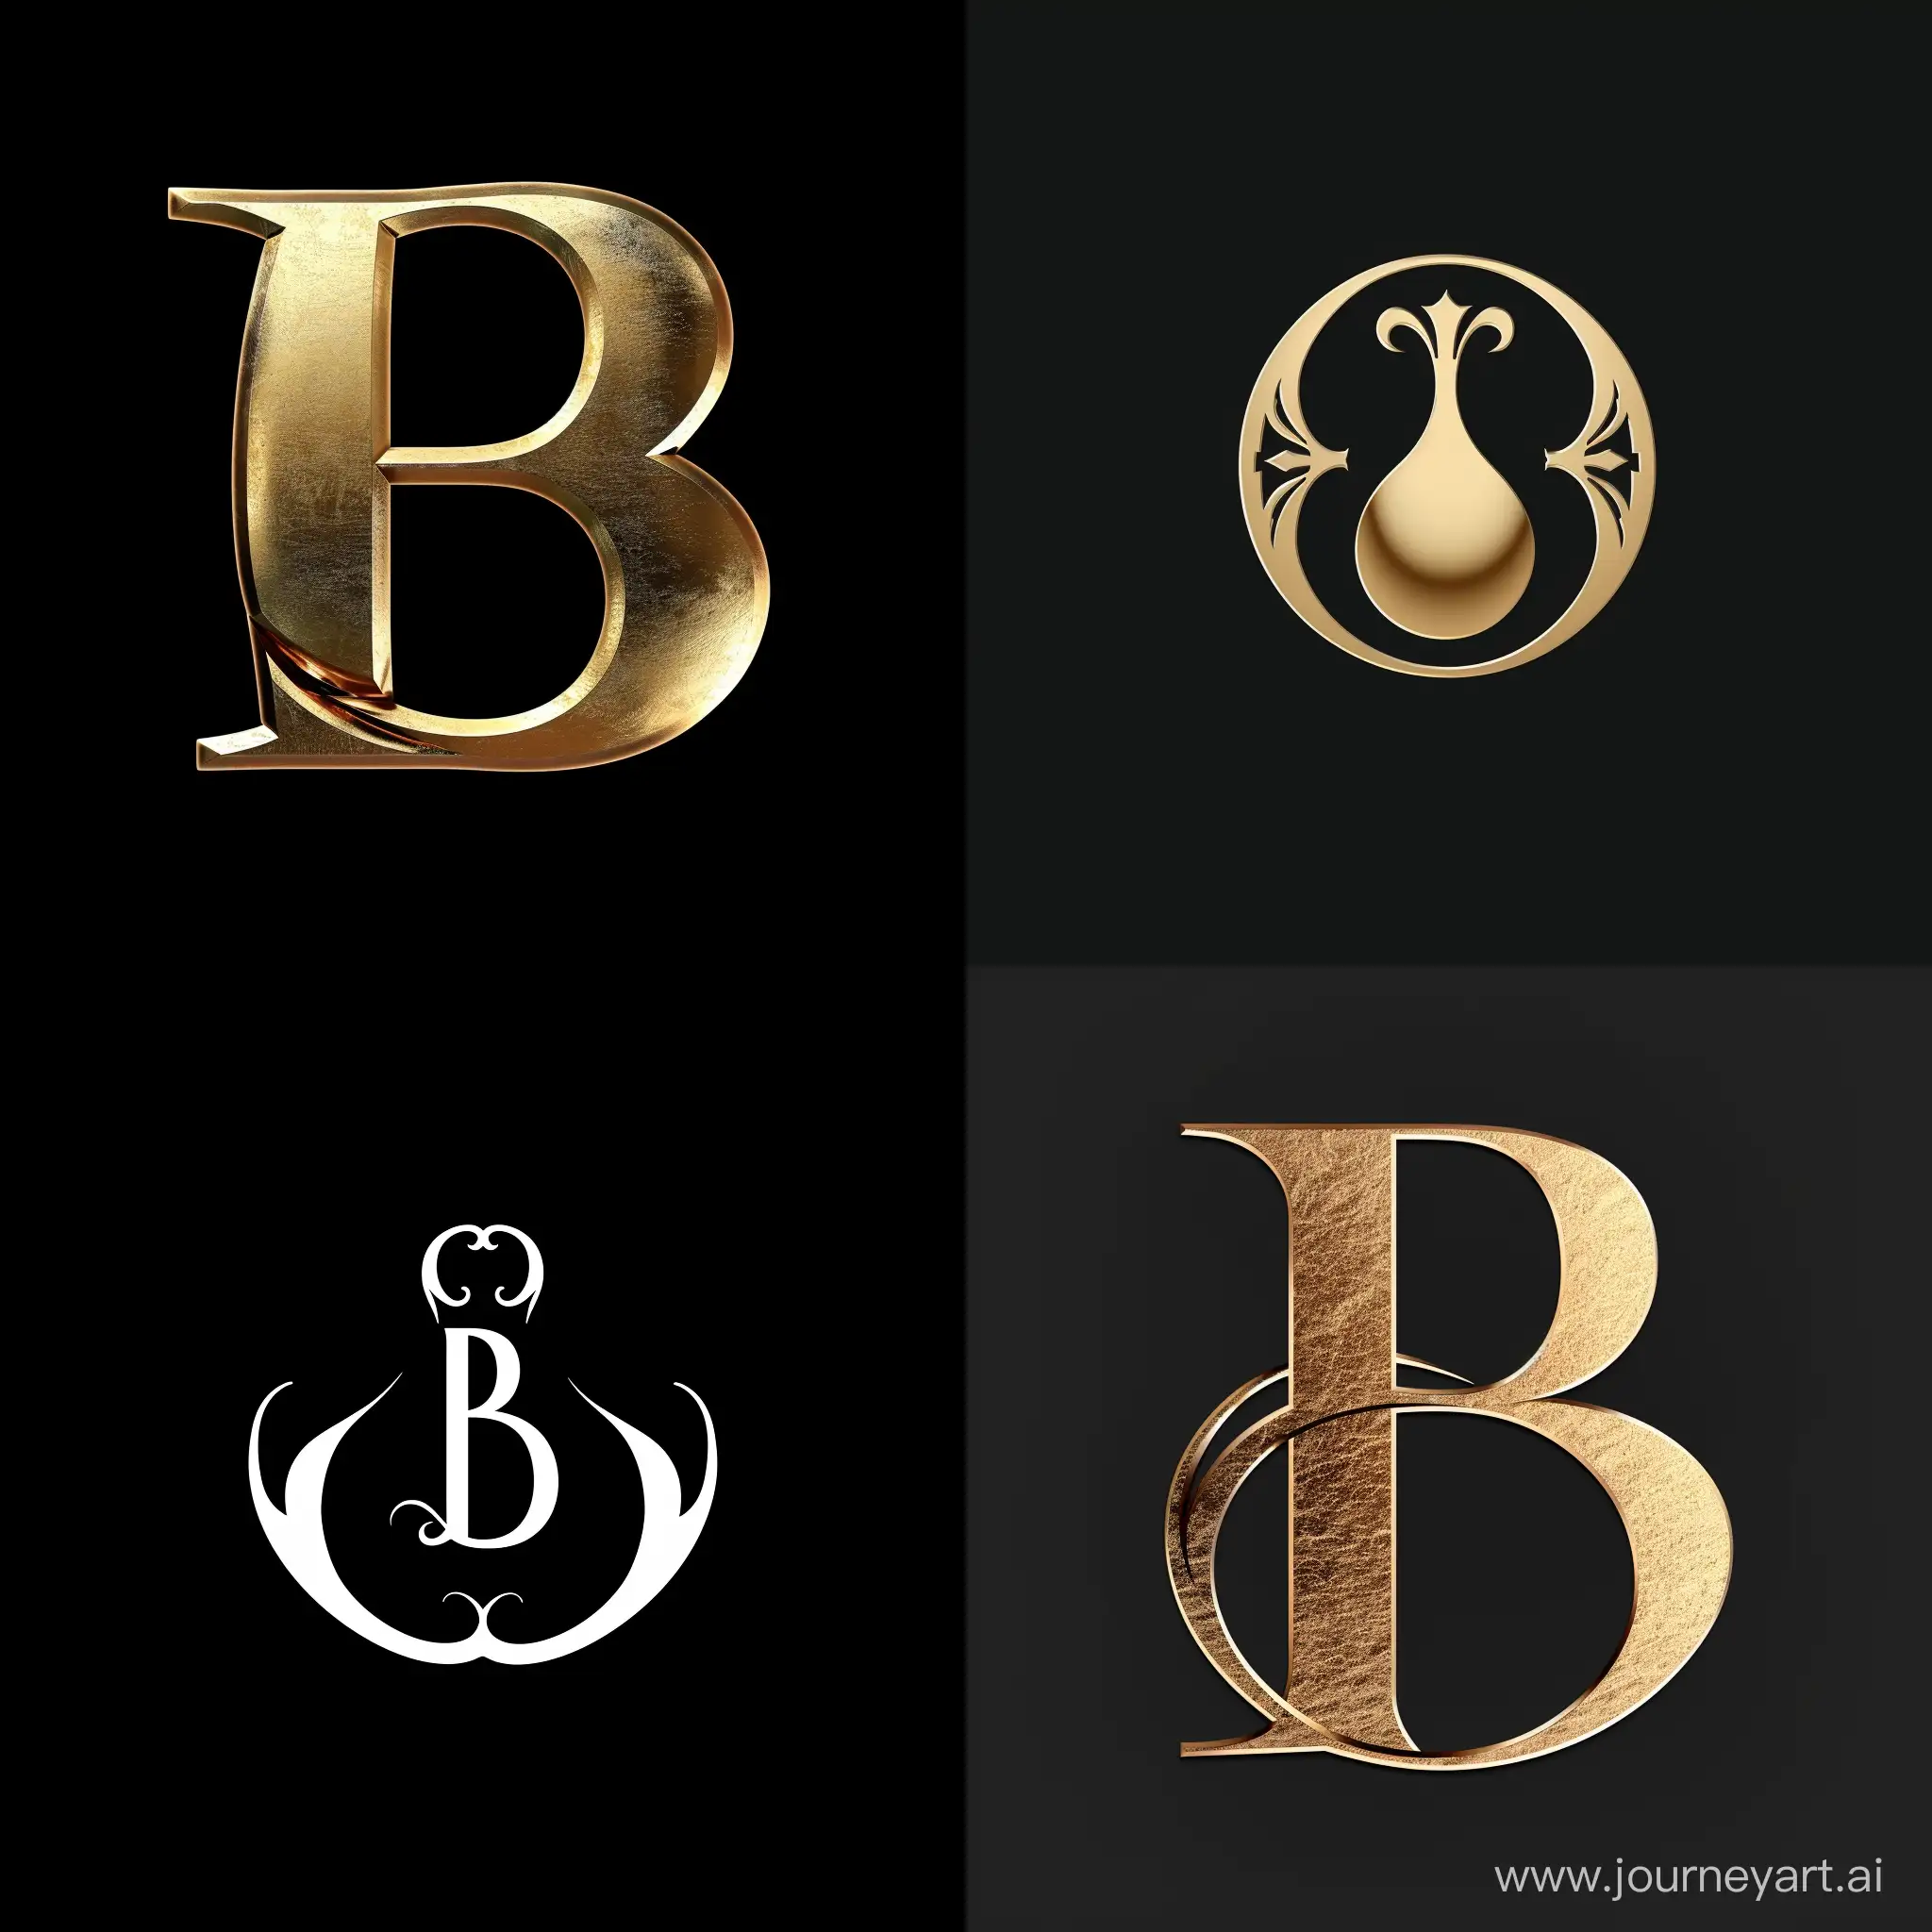 Generate logo with B letter like it’s pregnant